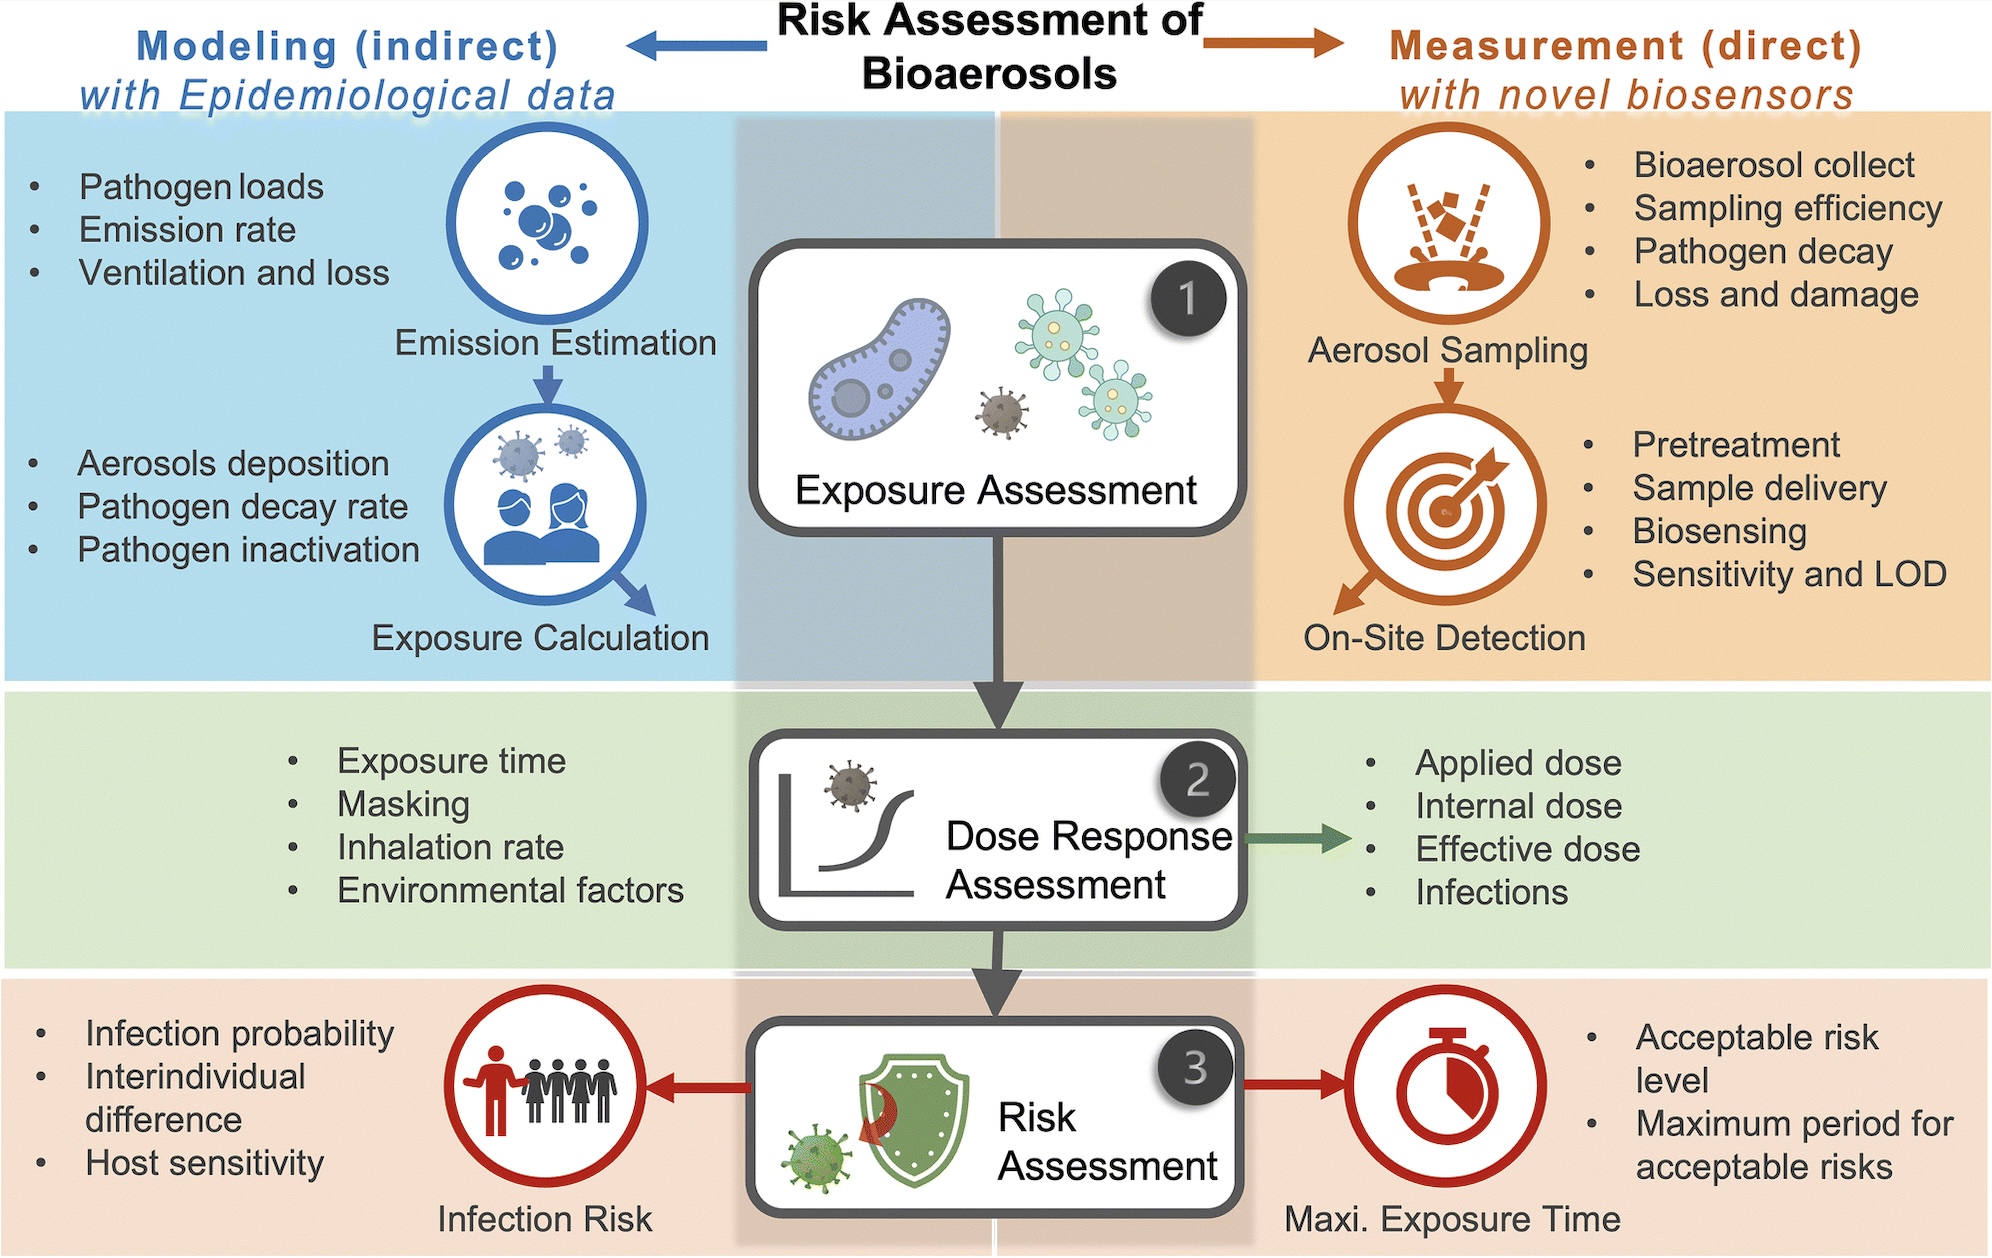 Schematic illustration of on-site risk assessment of airborne pathogens